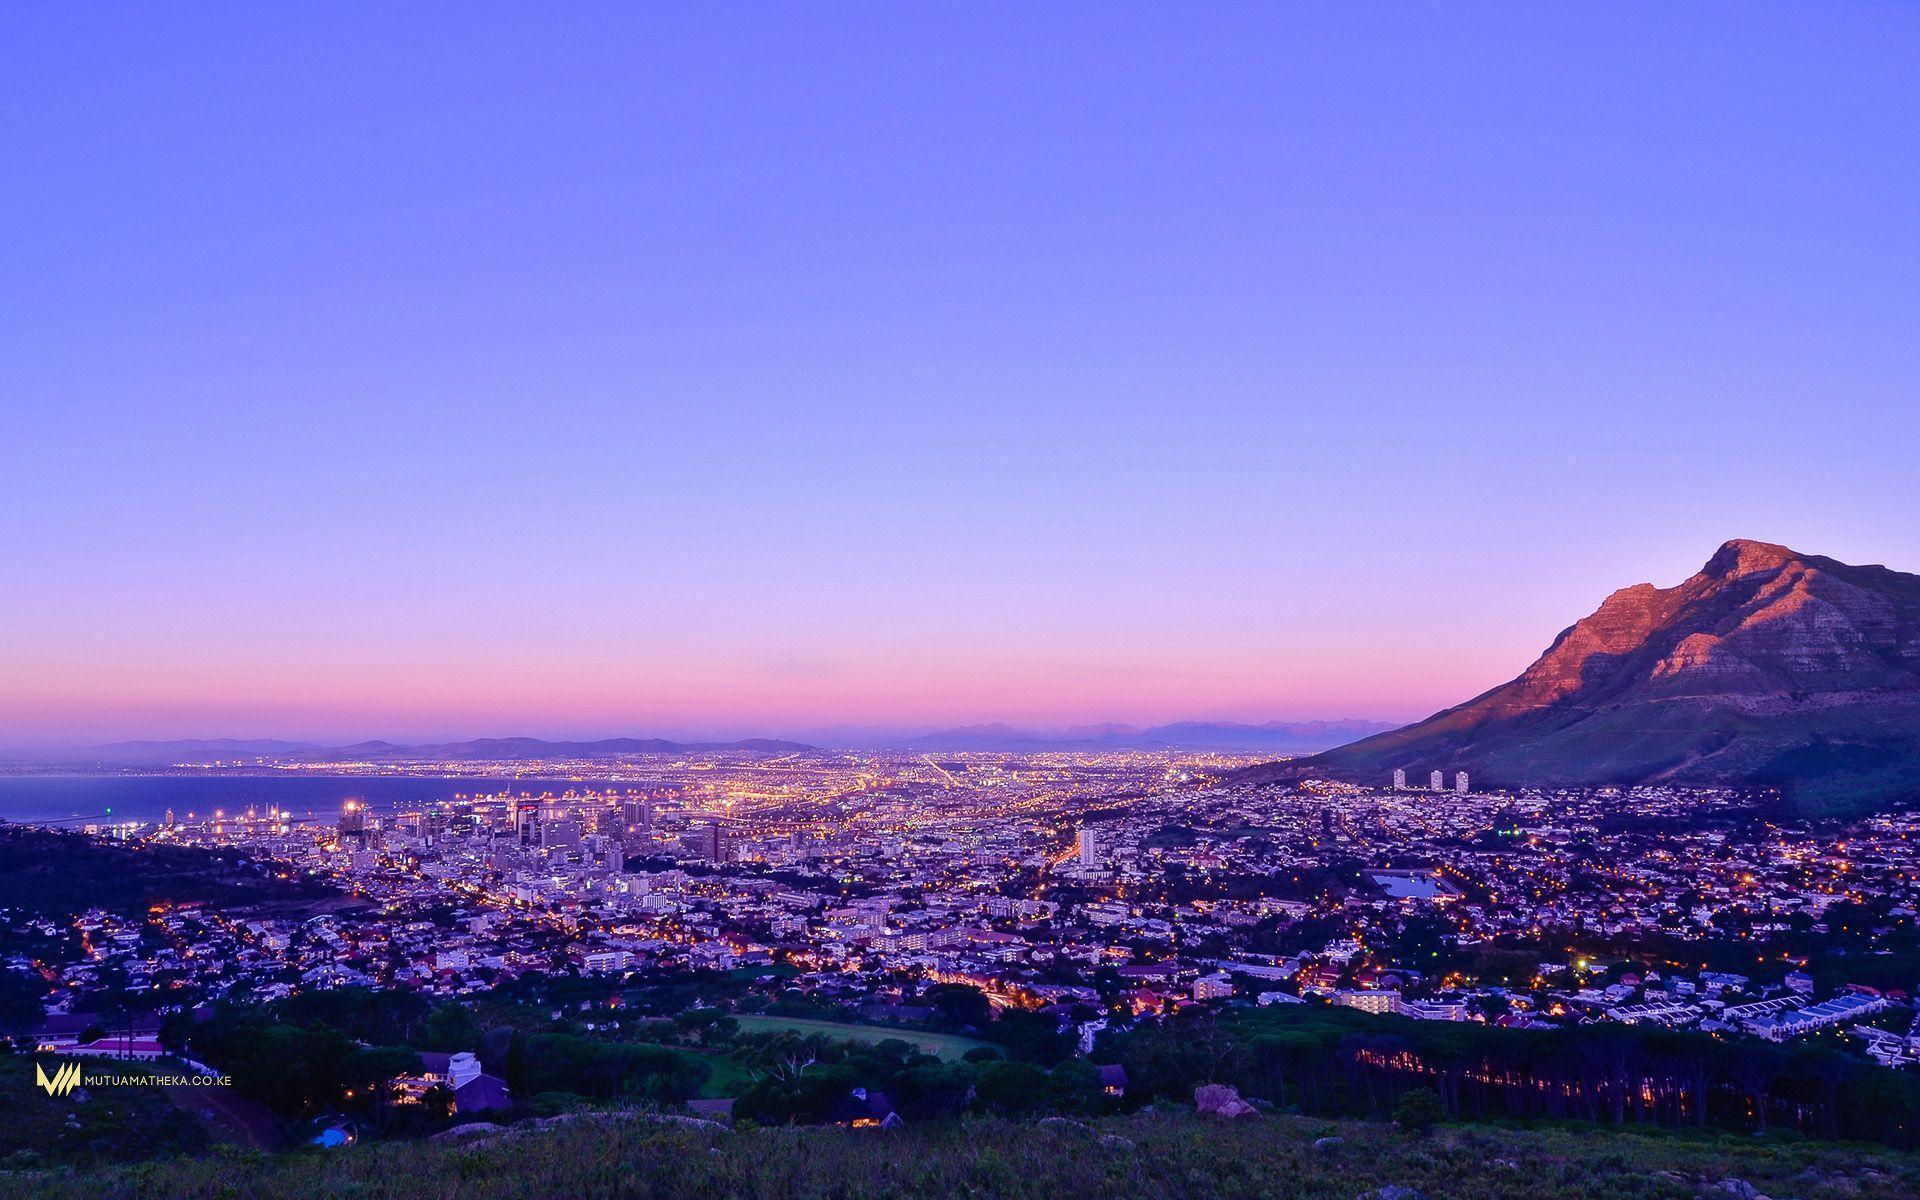 Wallpaper Monday [140] of Cape Town